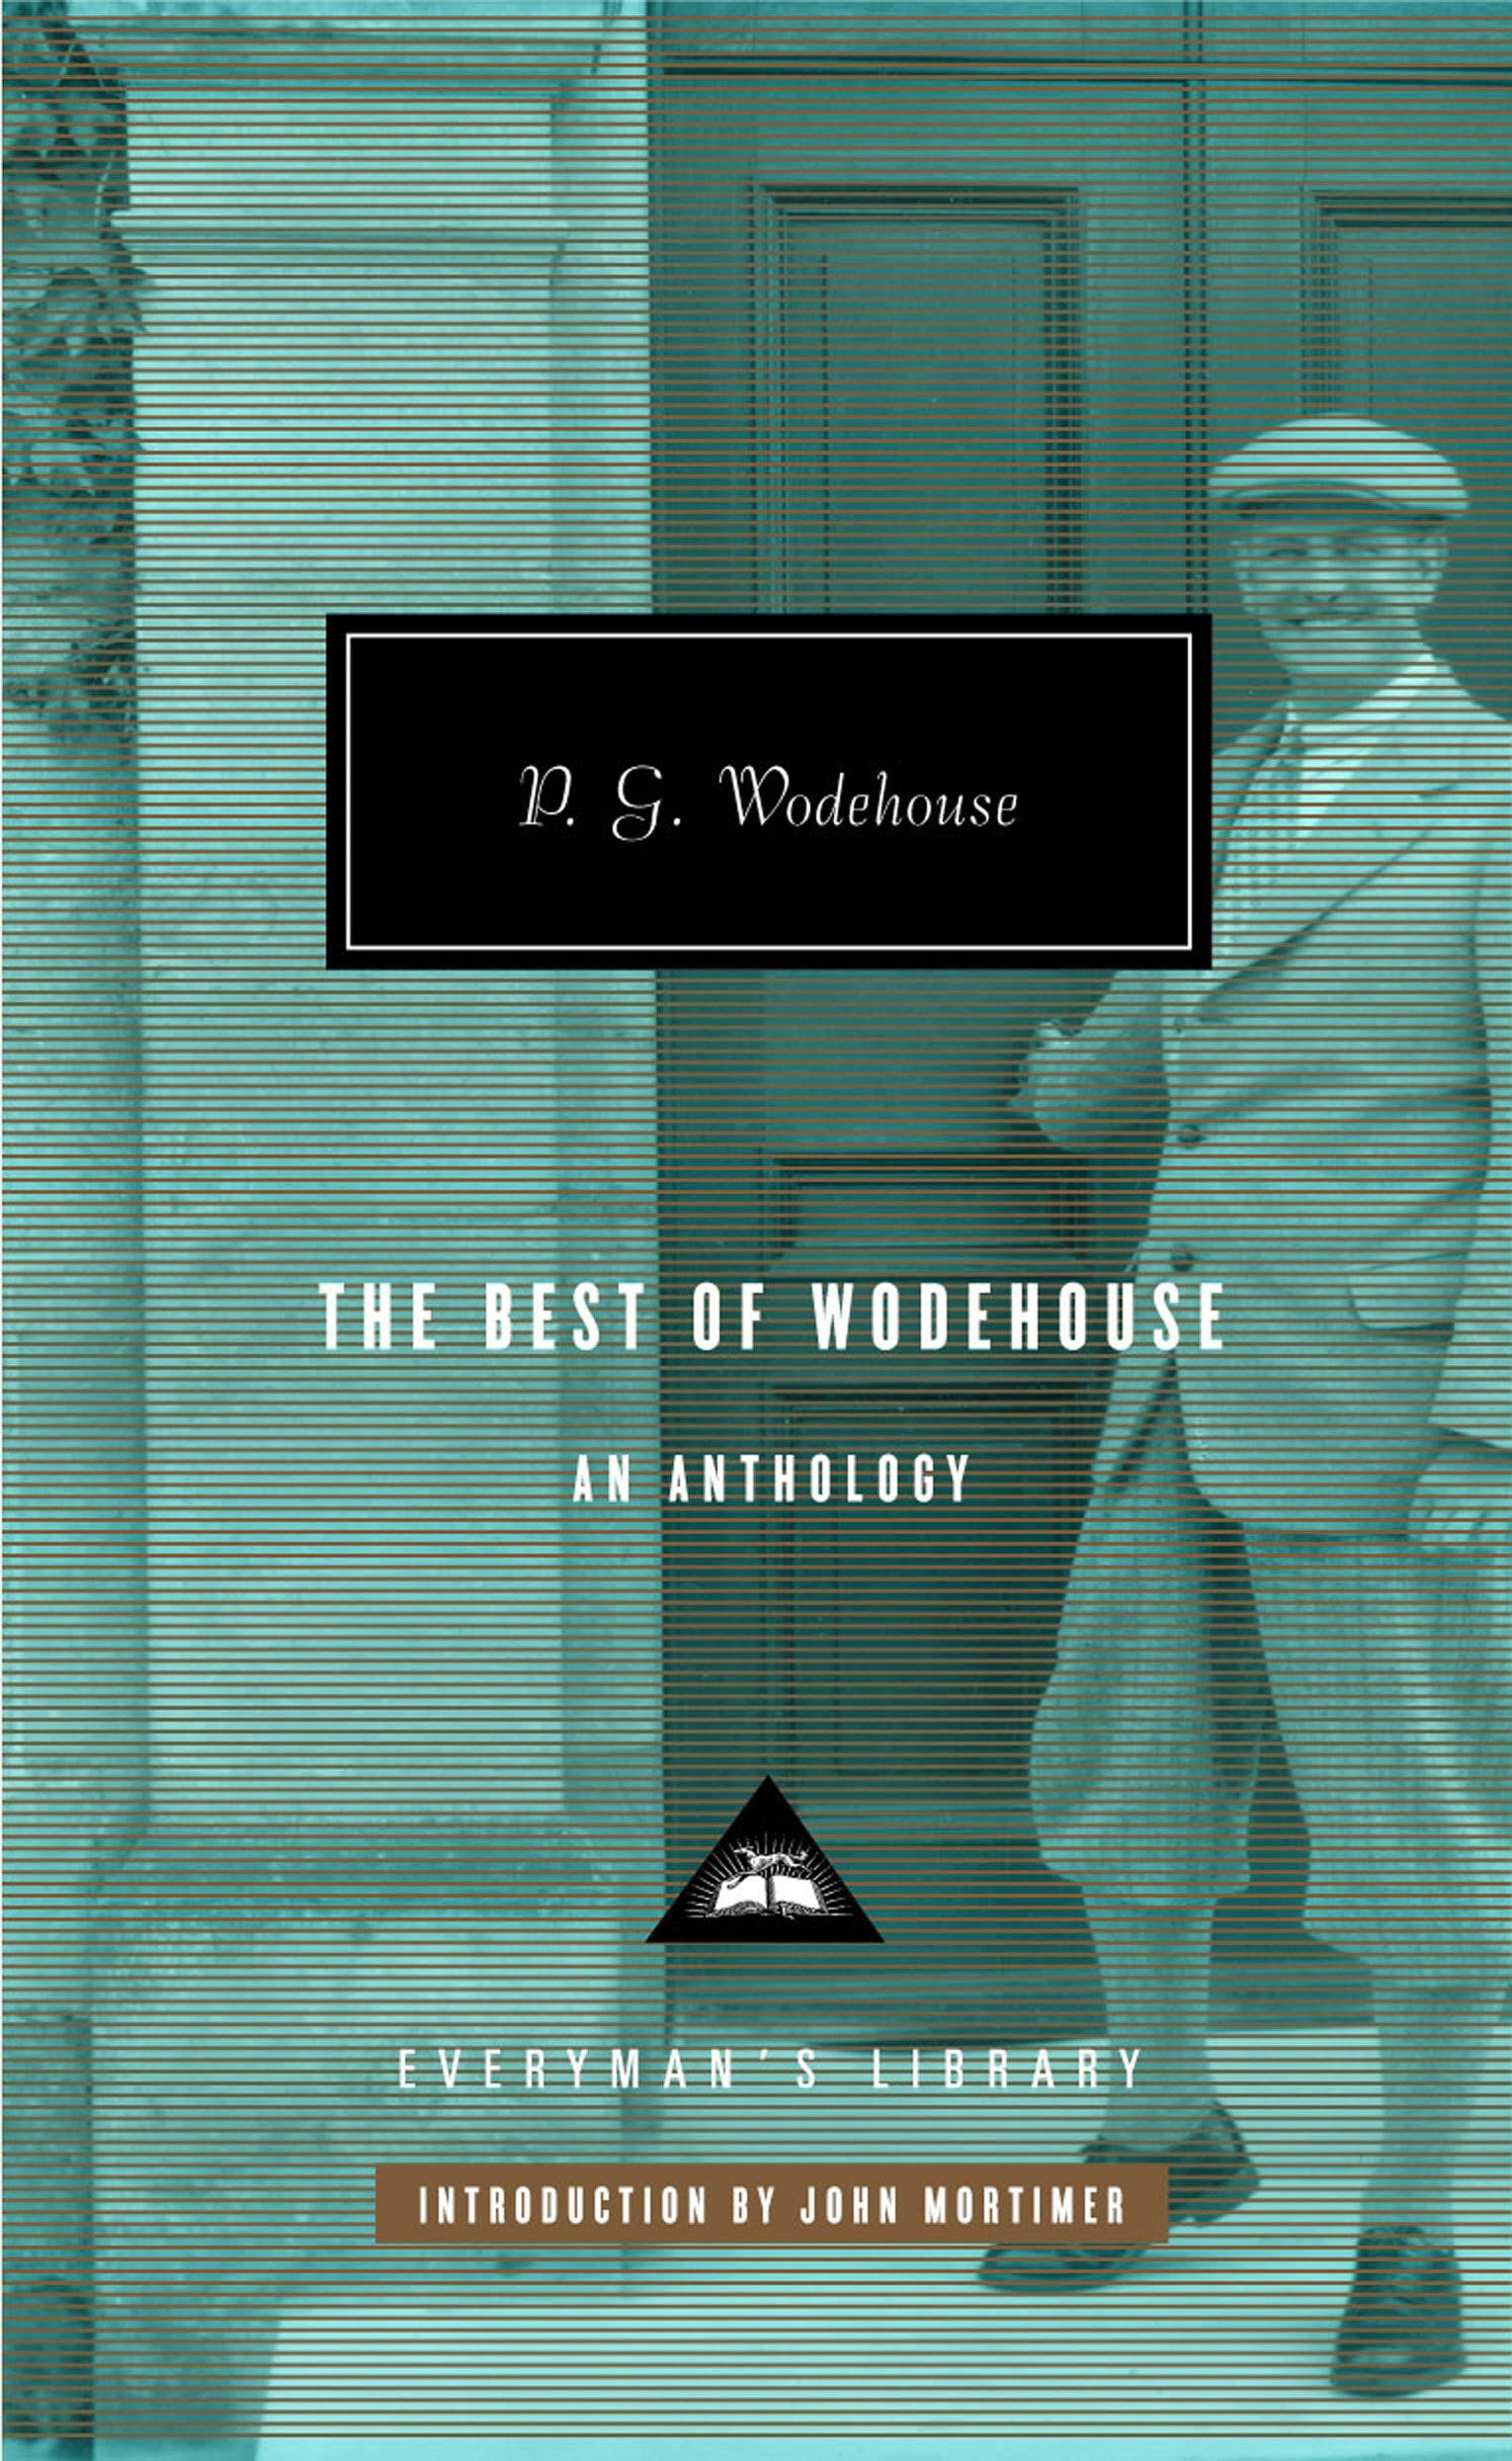 The Best of Wodehouse: An Anthology [Book]